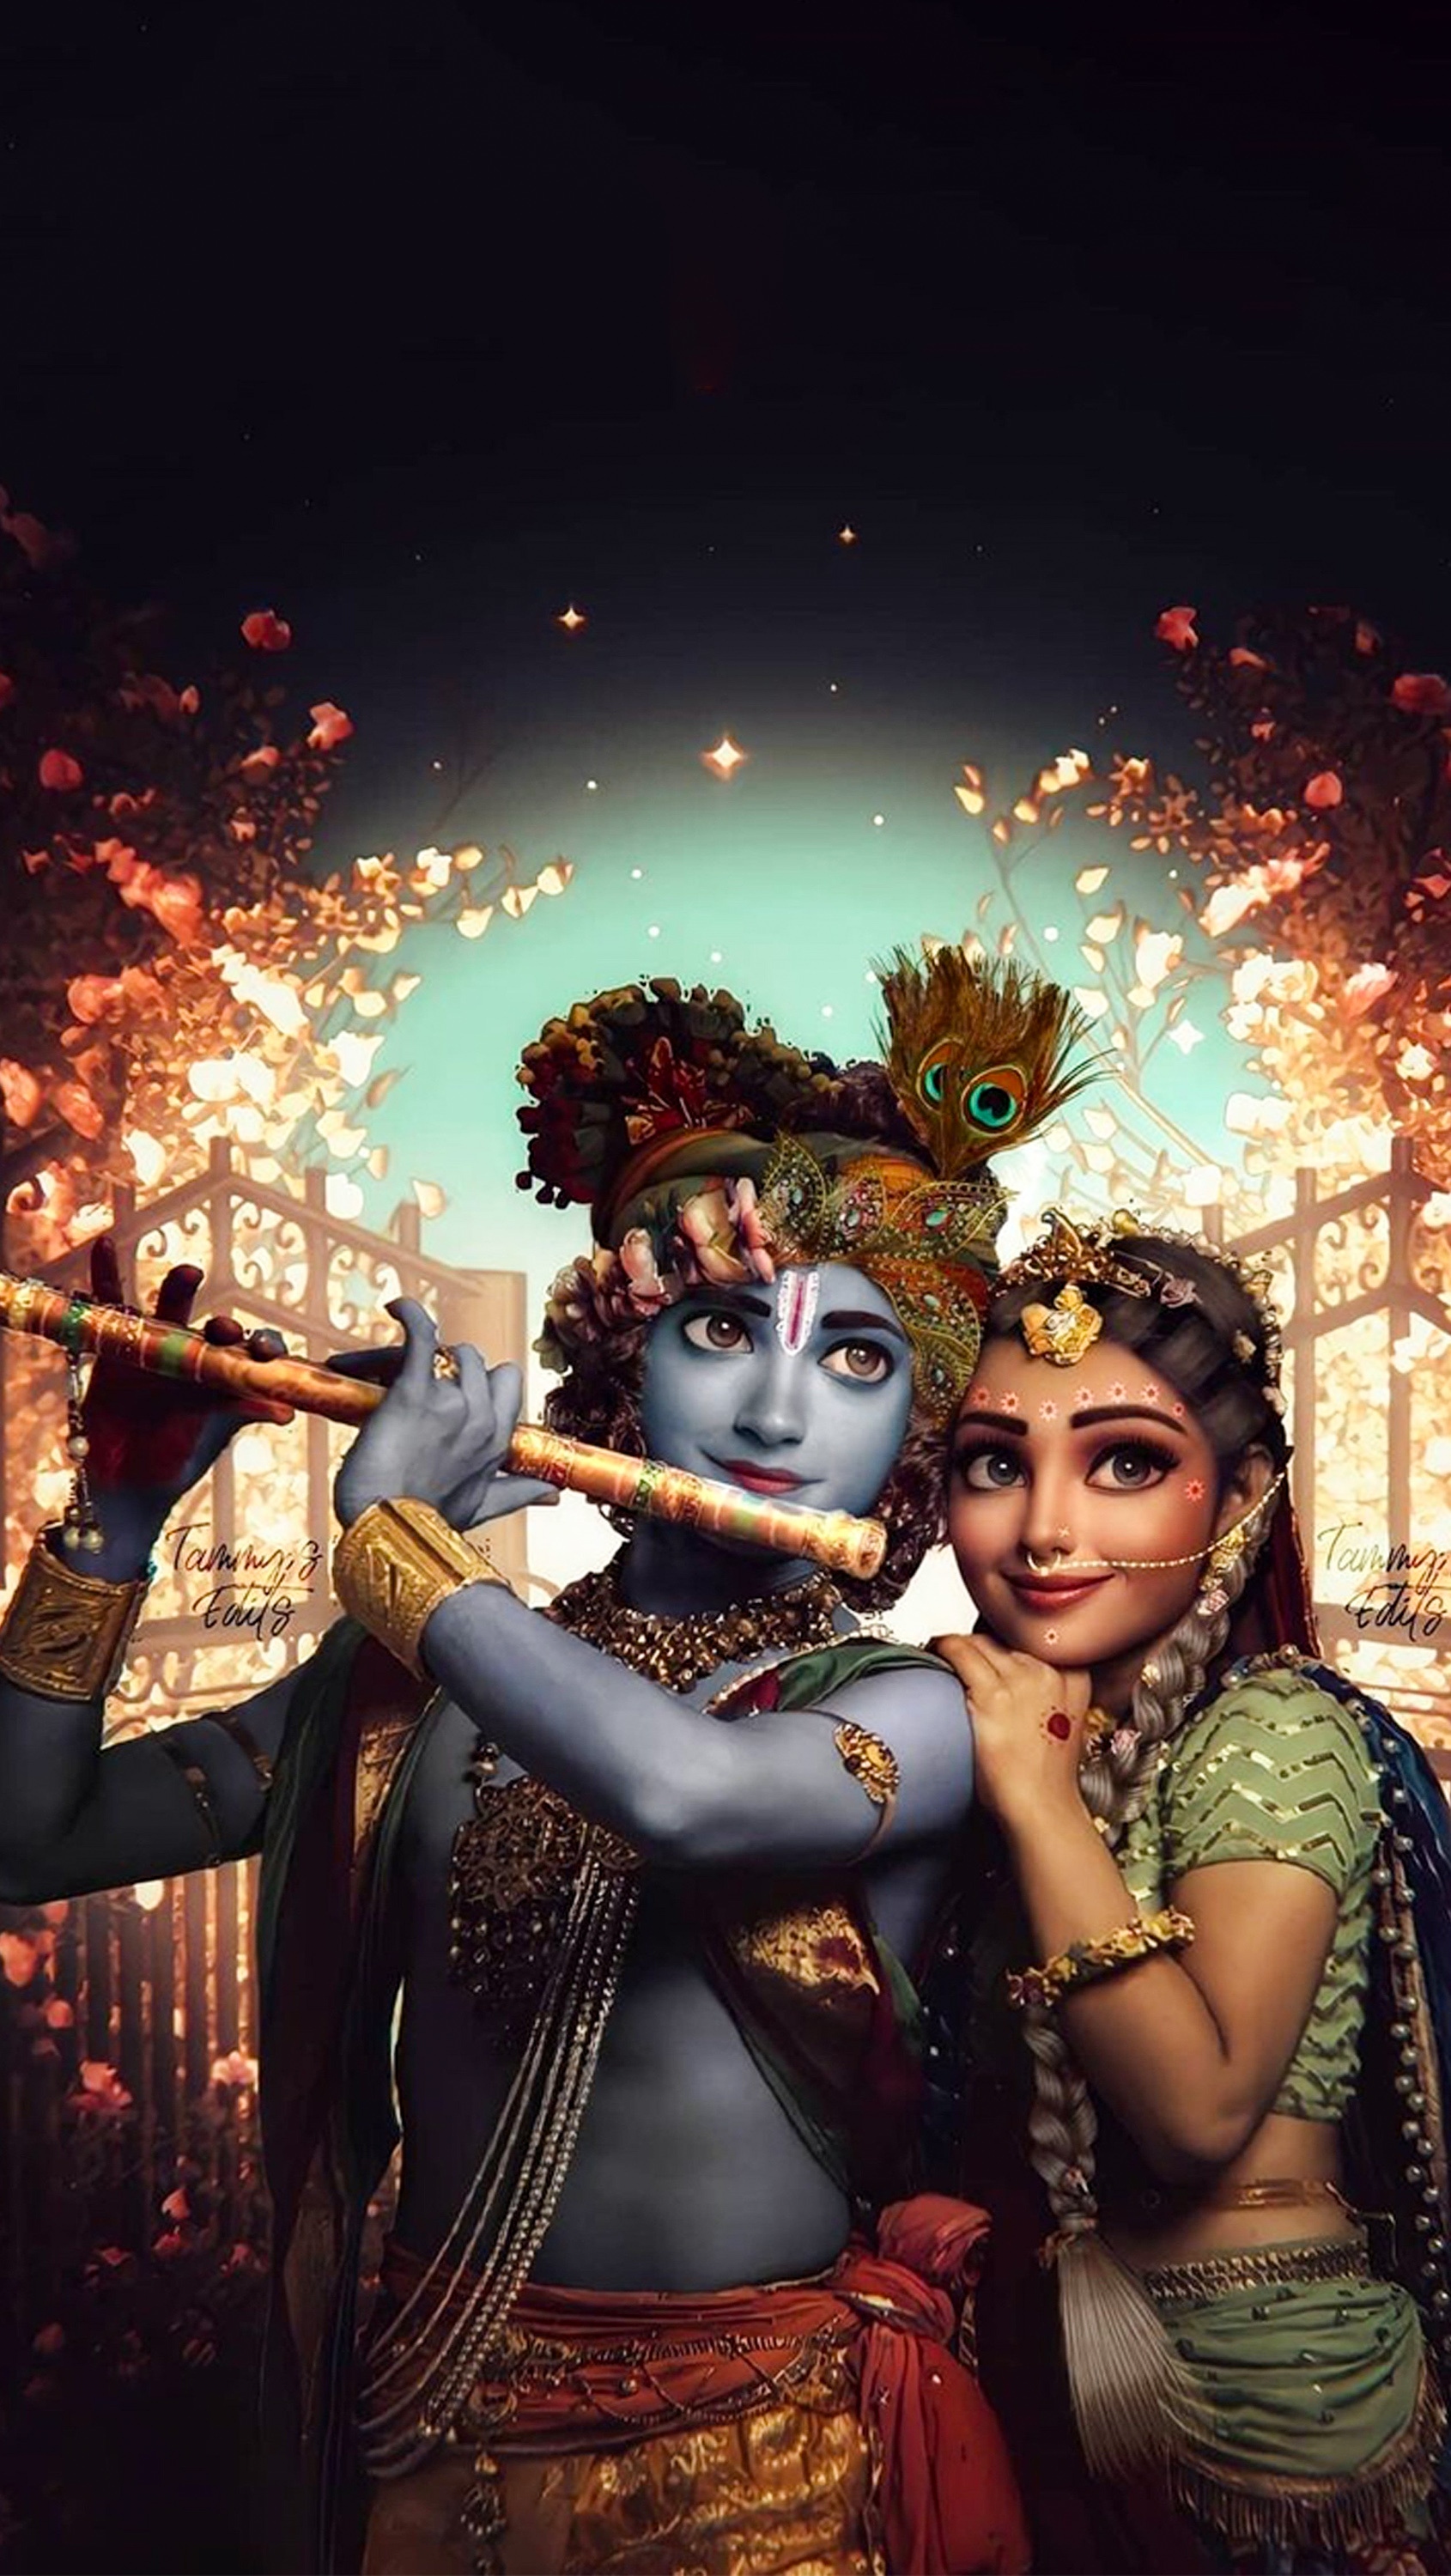 Indian Art - Digital Painting - Krishna with Flute - Posters by Raghuraman  | Buy Posters, Frames, Canvas & Digital Art Prints | Small, Compact, Medium  and Large Variants